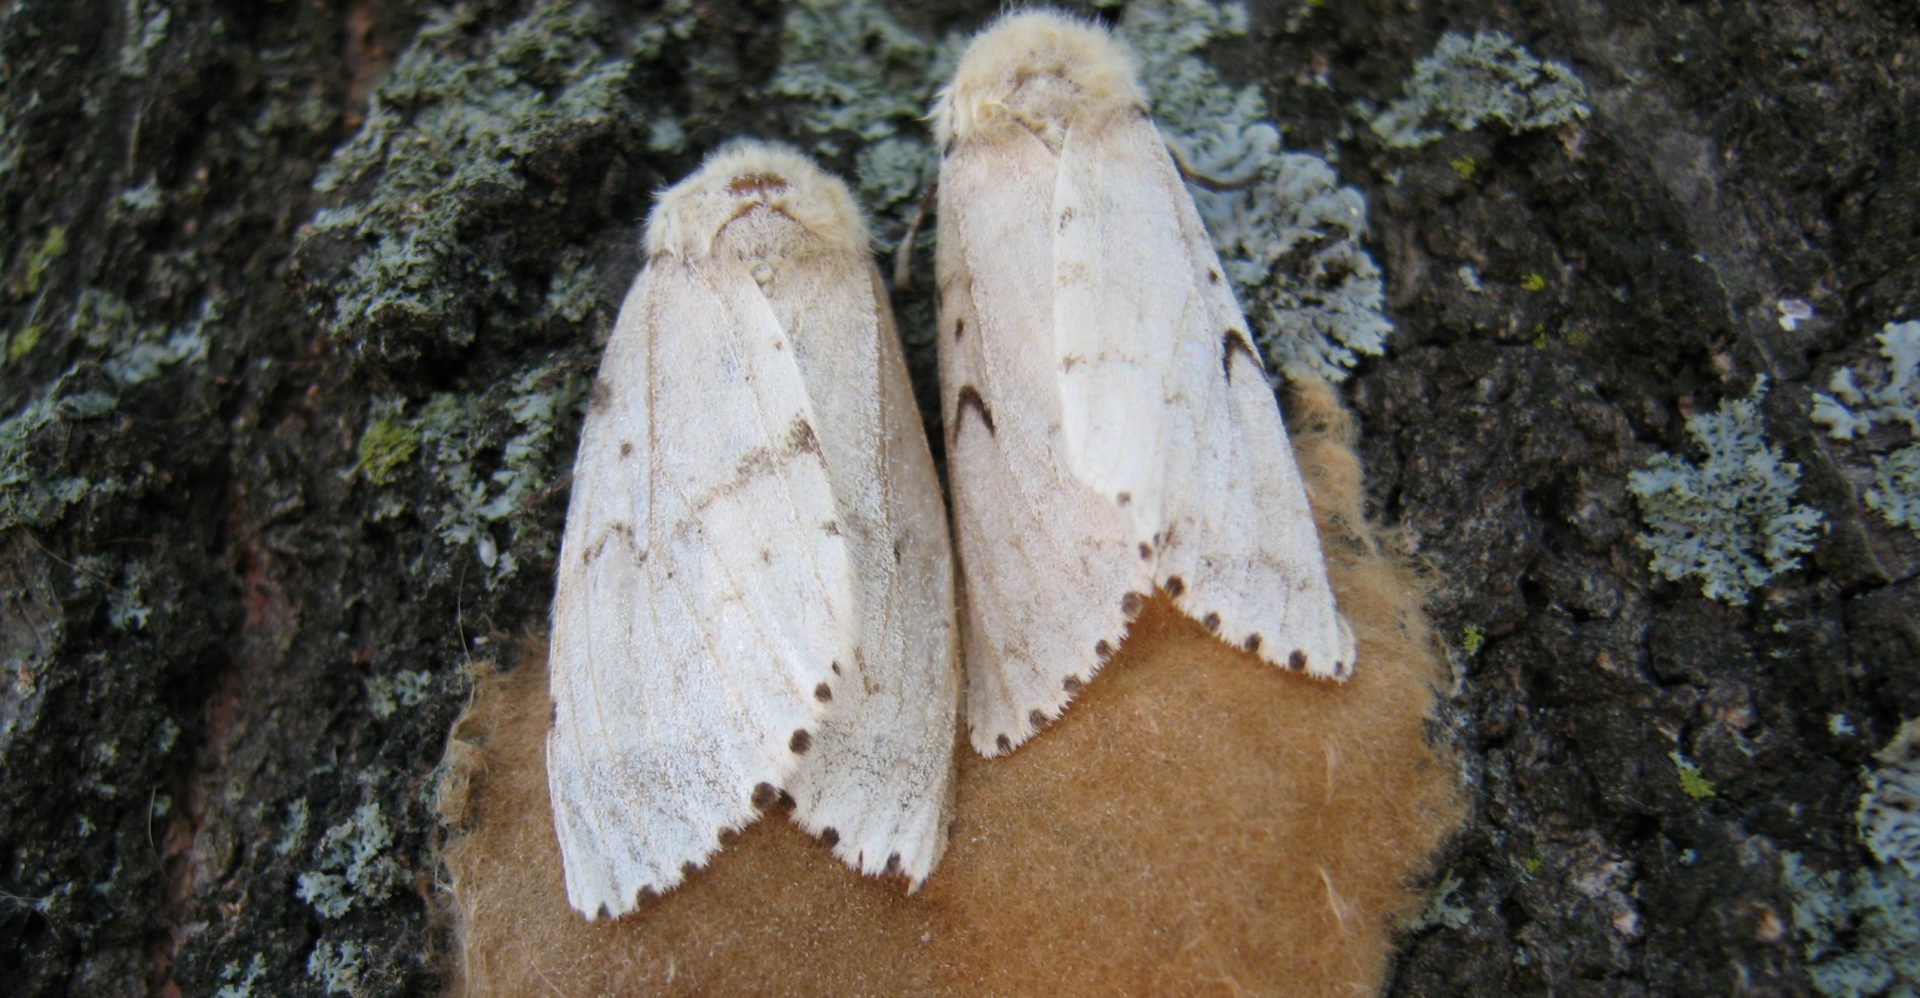 Gypsy moths and their egg masses can be found on trees. The Pennsylvania Department of Conservation and Natural Resources sprayed for the insect in 19 counties in May 2021.